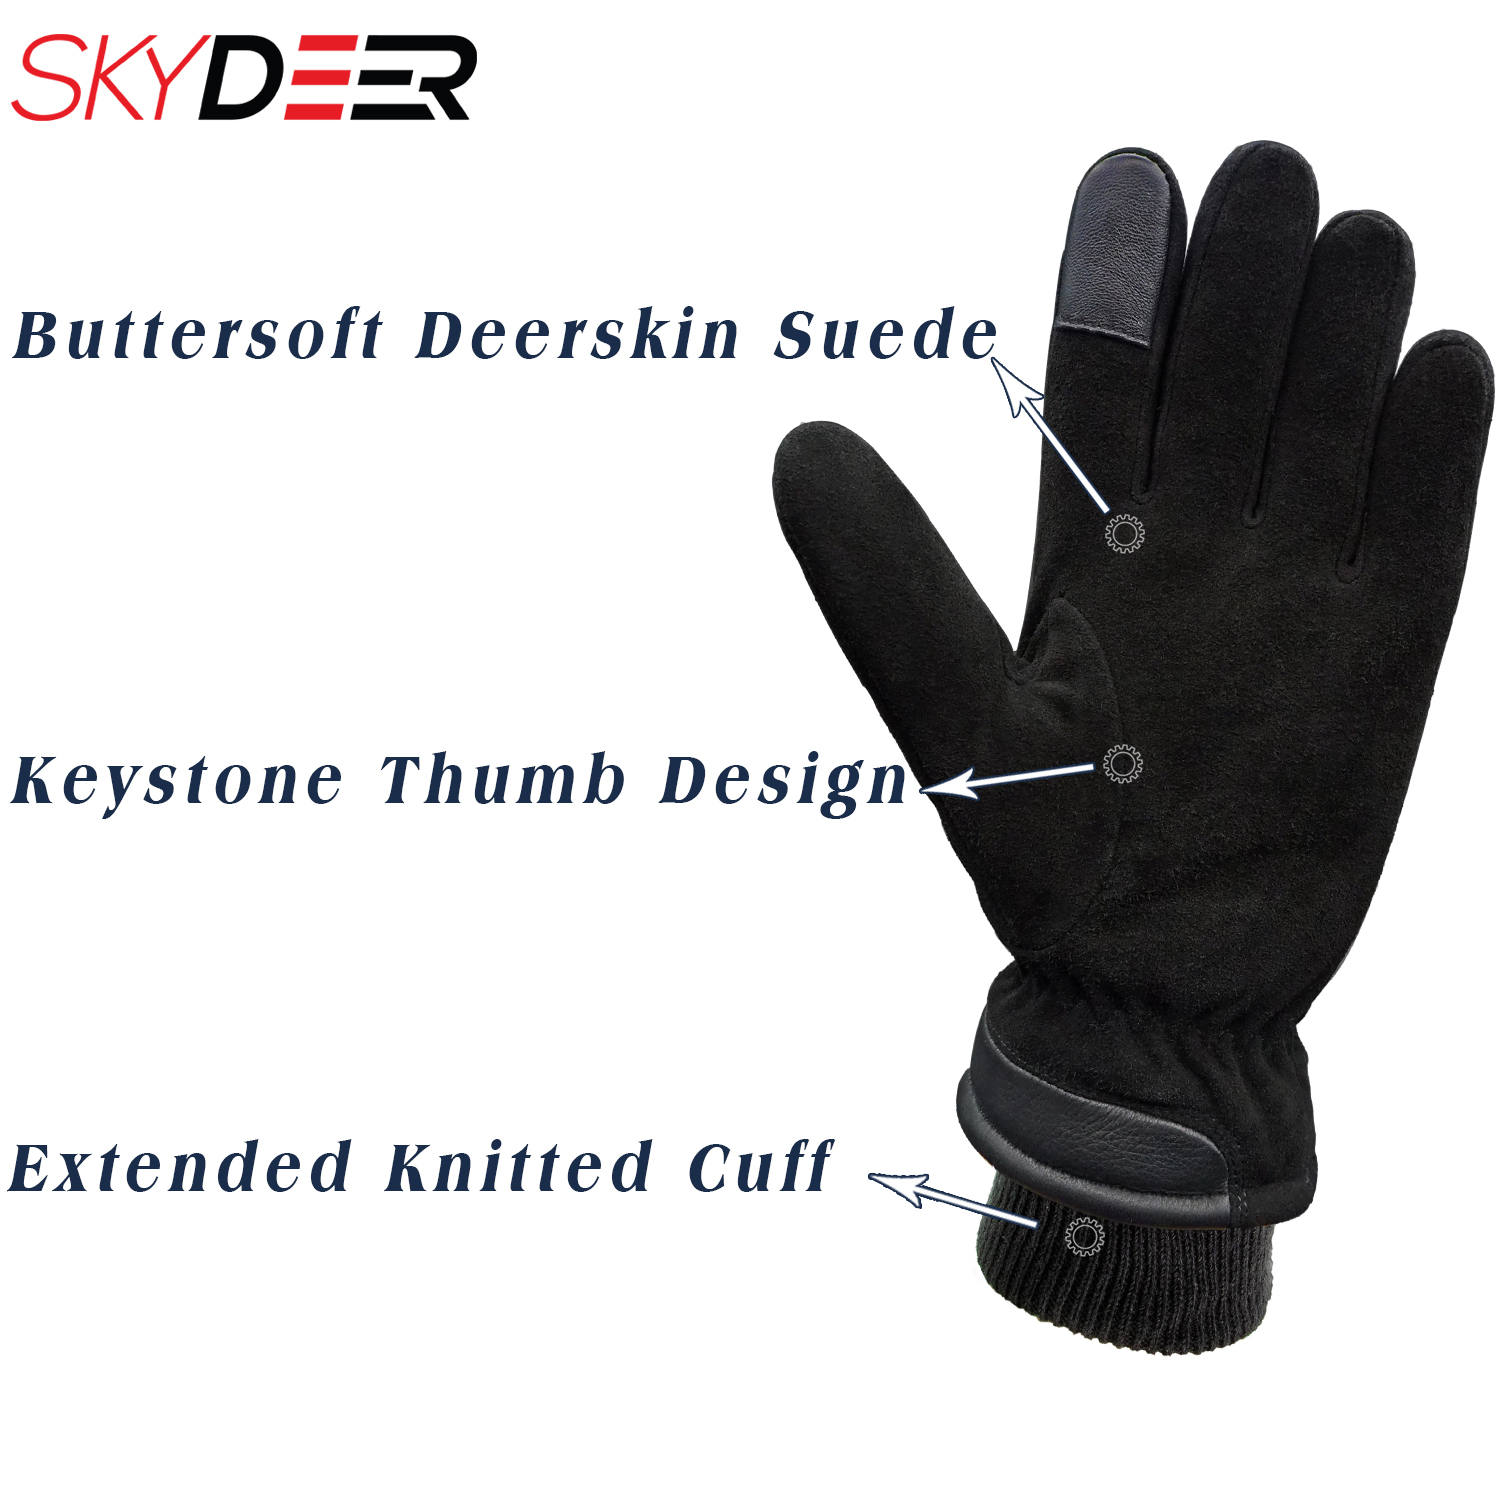 SKYDEER Winter Deerskin Leather Work Gloves for Men and Women, Warm TR2  Socked Lining for Cold Weather Work, Thermal Insulated Gloves (SD8684T/M) 